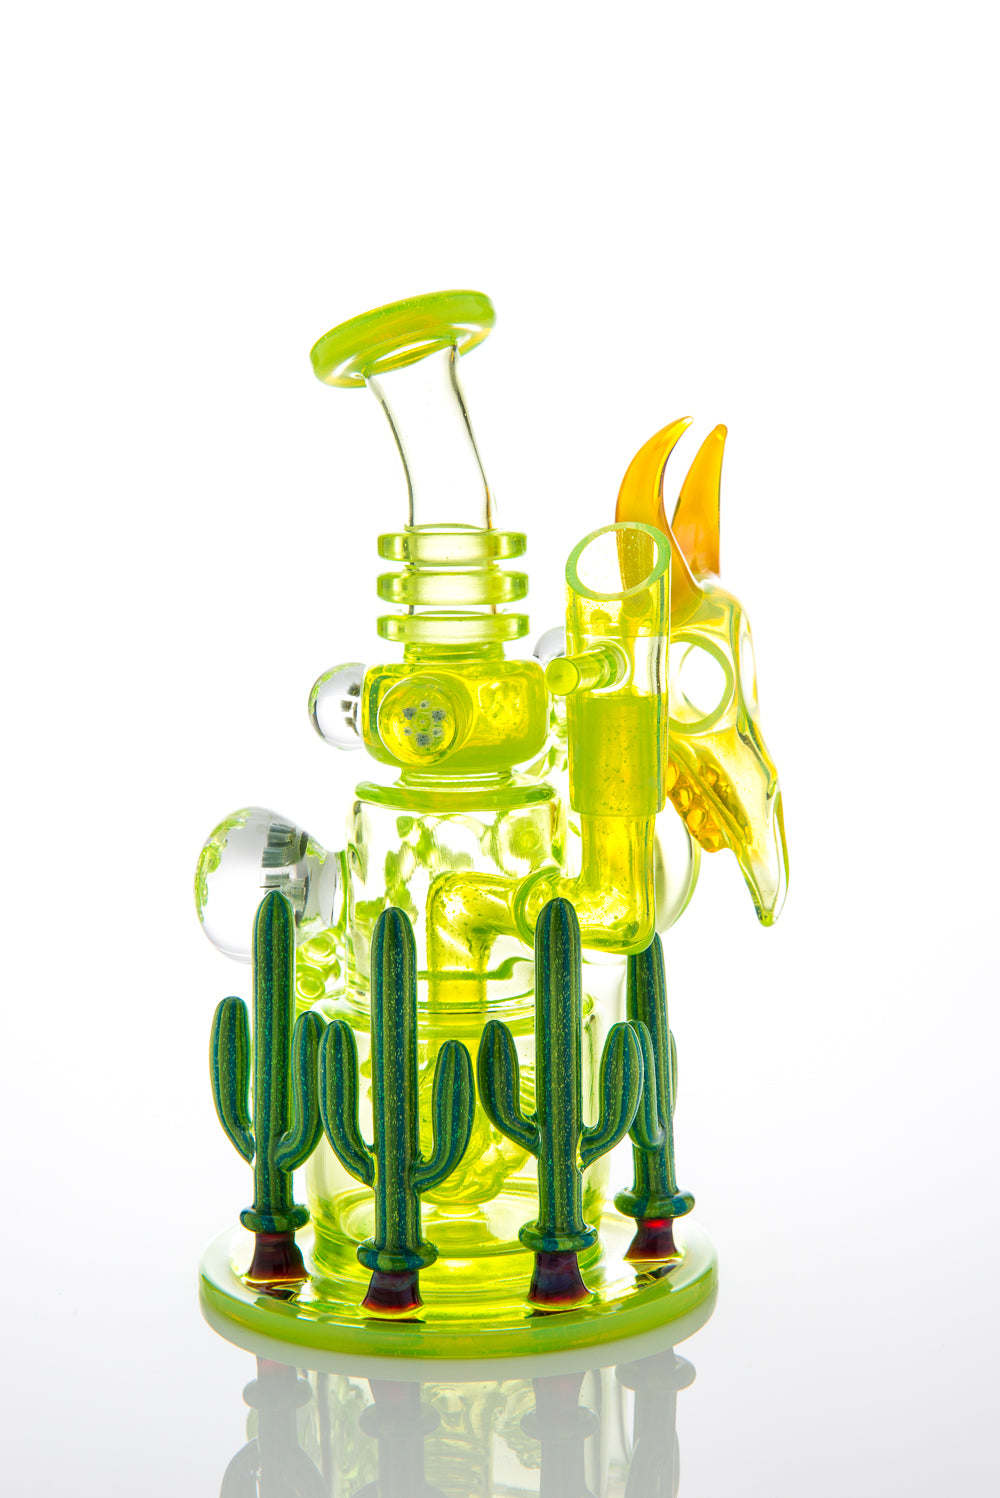 Ill Glass 4/20/2014 Party Flux Cycler Collaboration with Jason Lee, Buck, Darby, and Adam. G